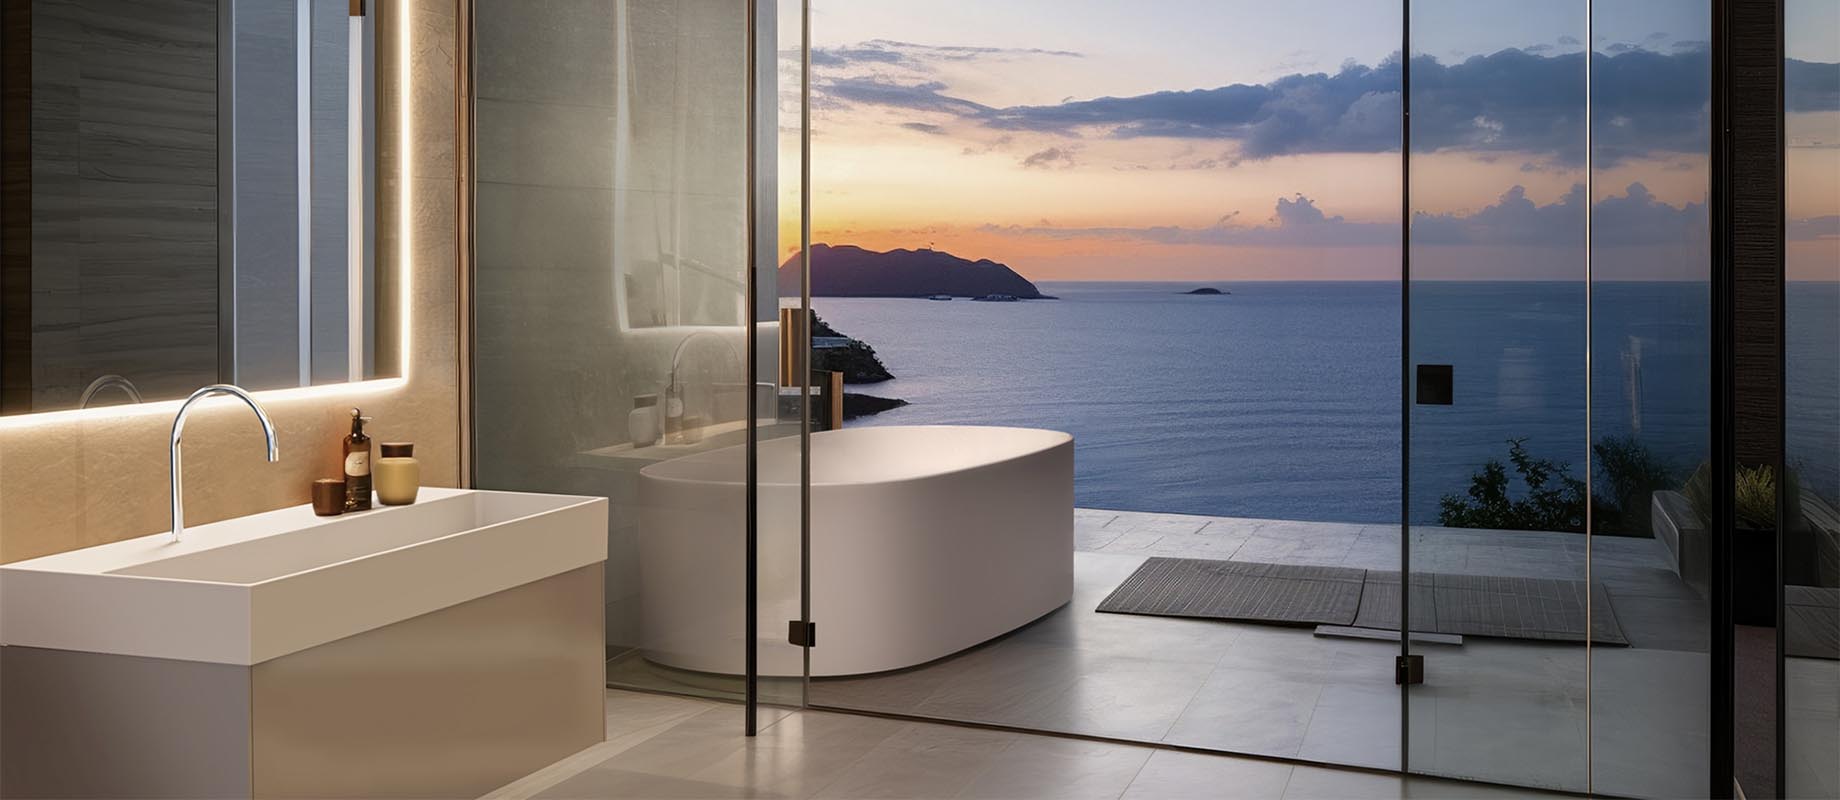 Ideal Standard | Bathroom and Supplies | Bathroom Solutions More